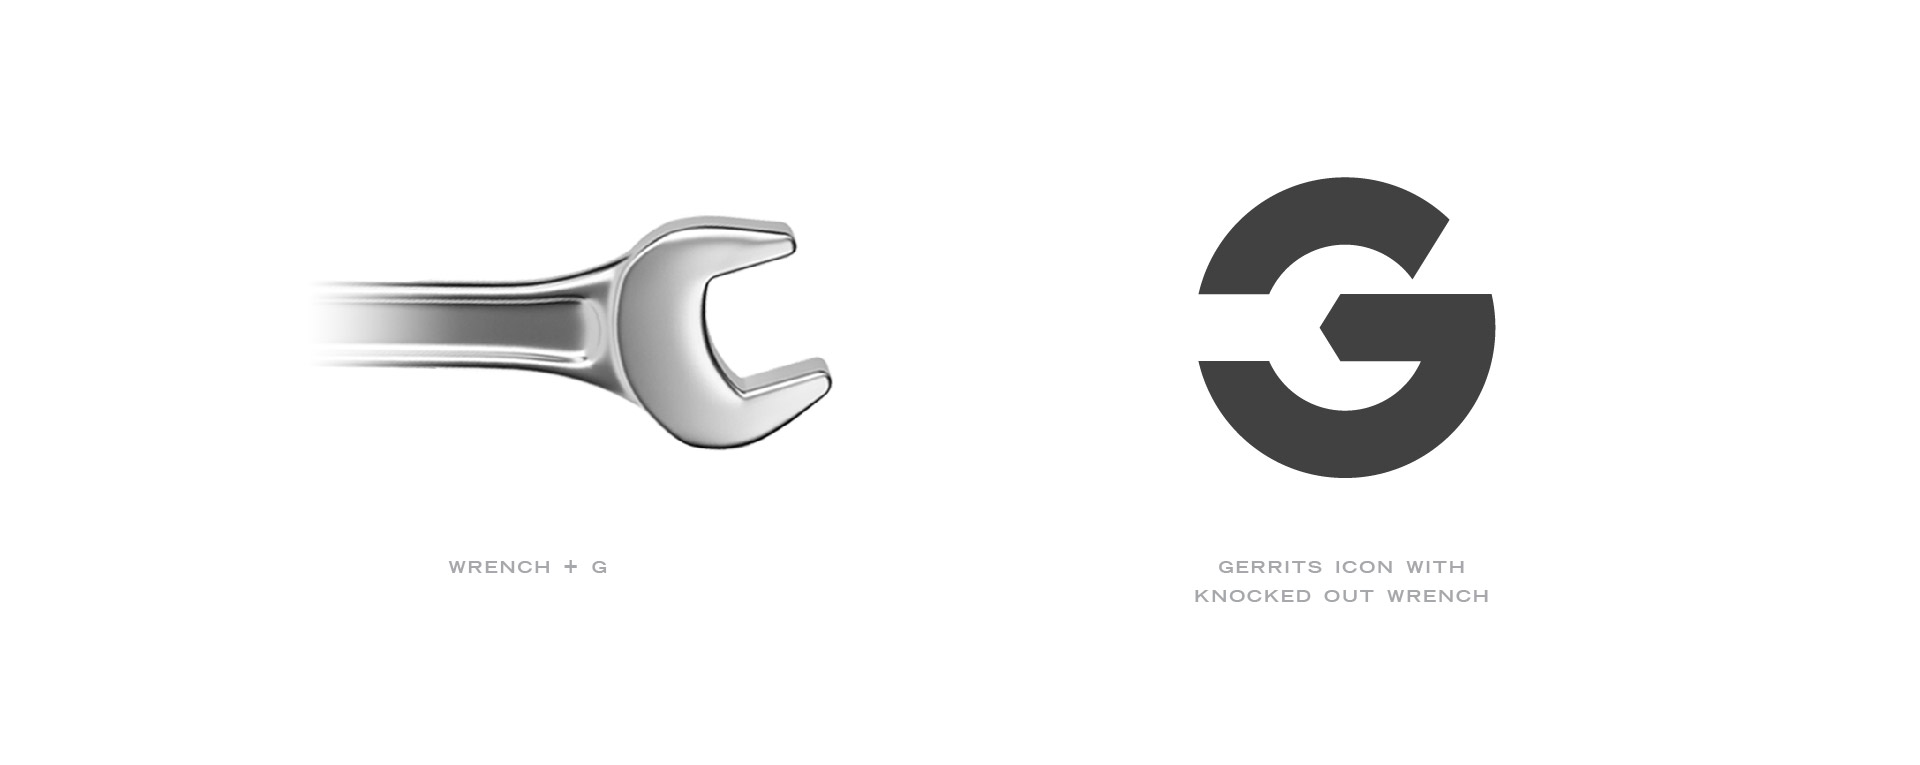 gerrits engineering logo icon explanation with wrench